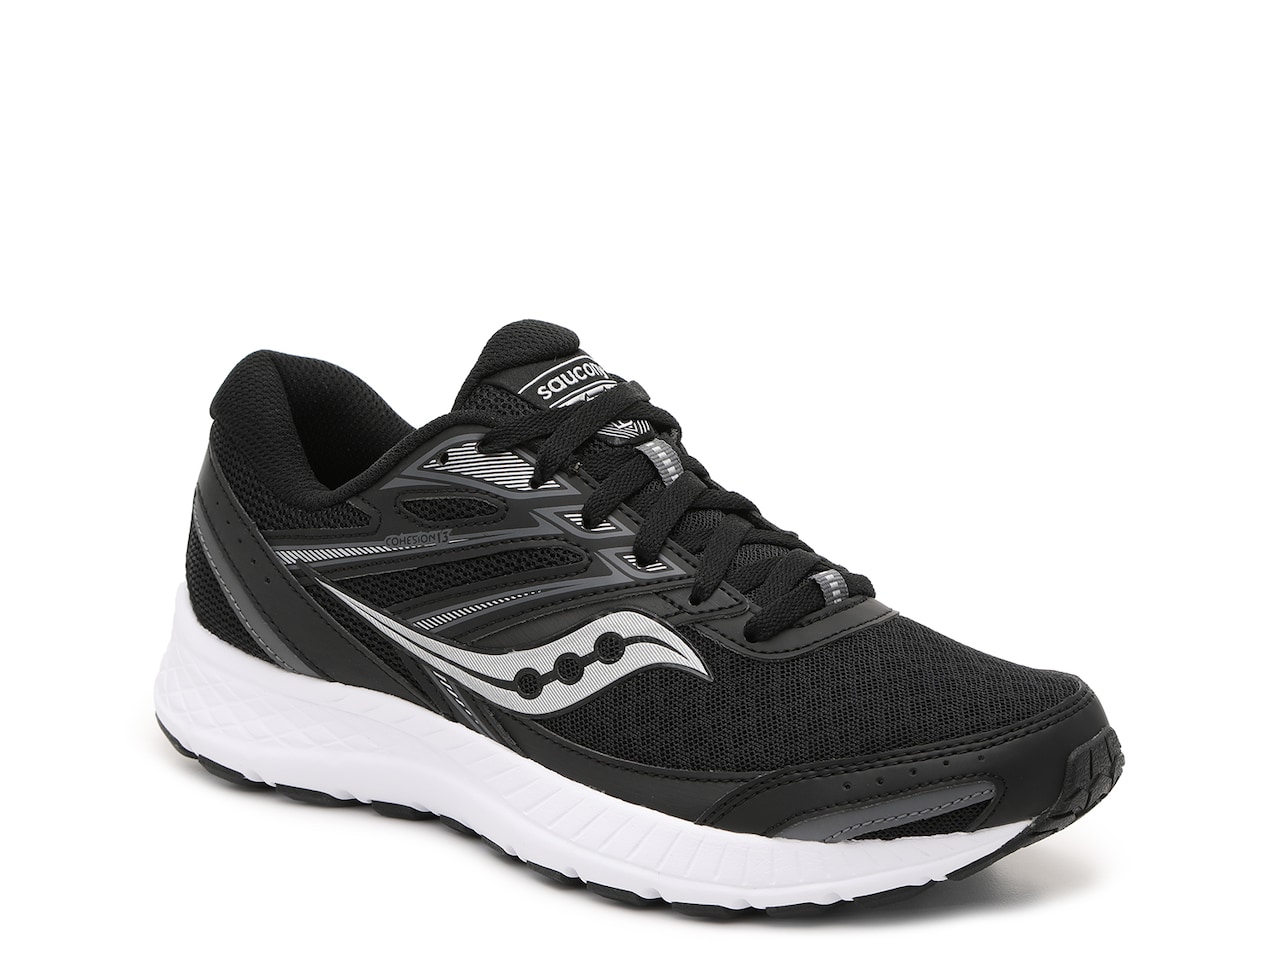 Saucony Women's Cohesion 13 Running Shoes (White/Black, Wide Width) $18 + Free Shipping